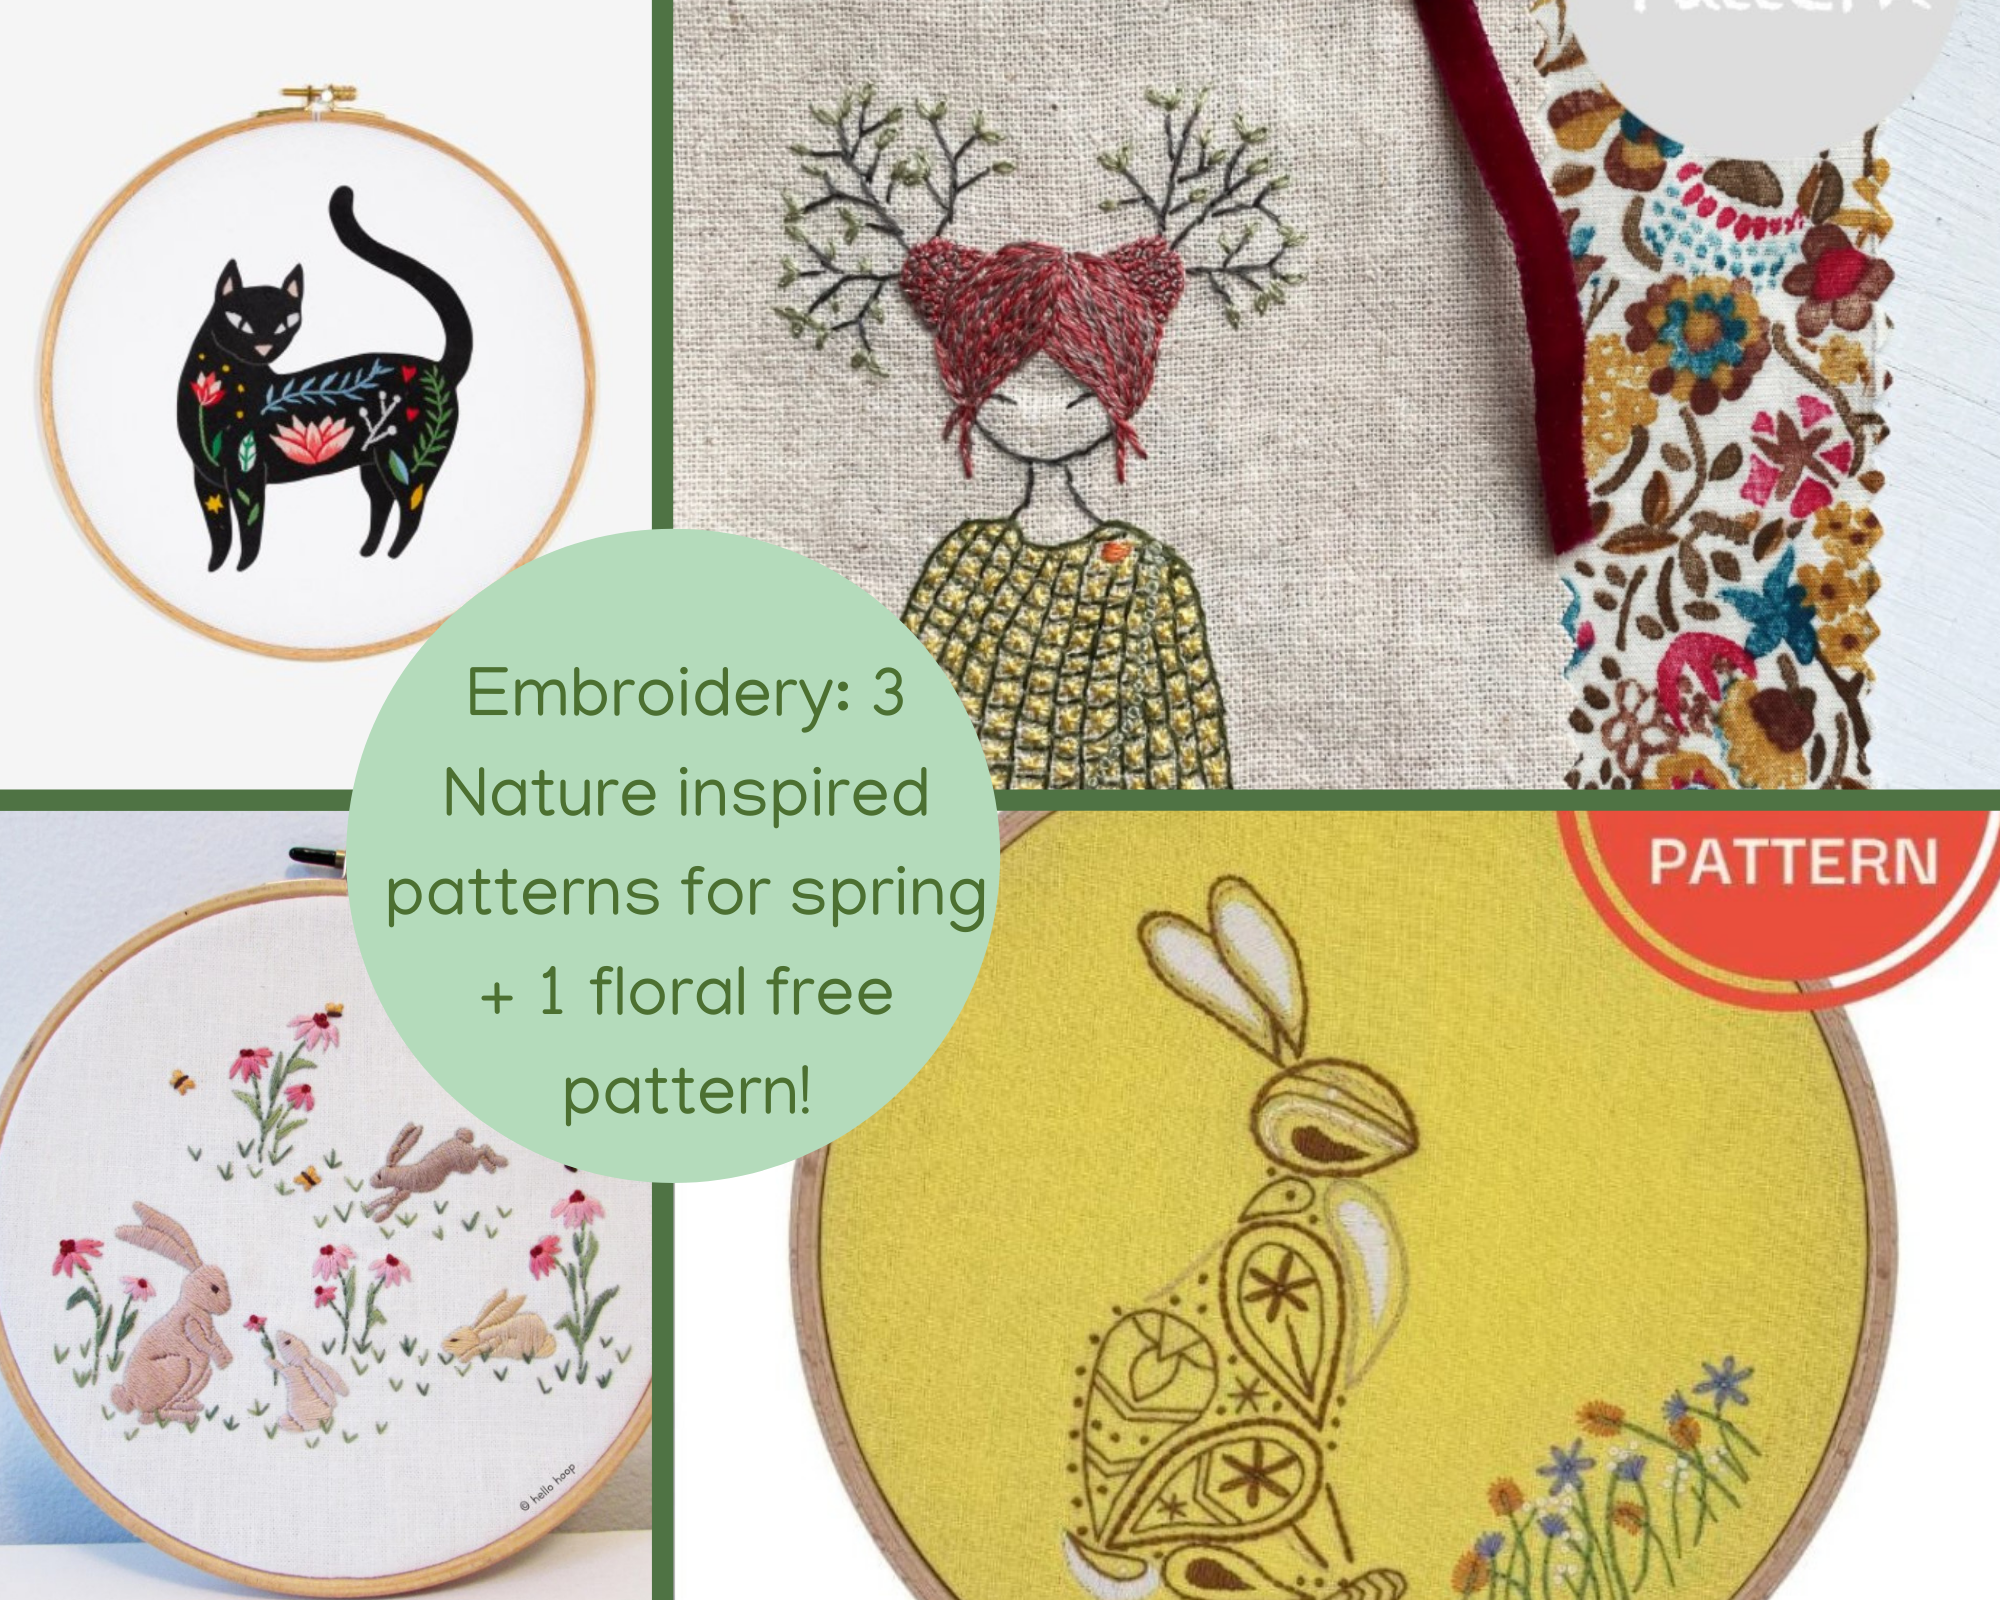 Embroidery: 3 nature inspired patterns for spring + 1 free pattern